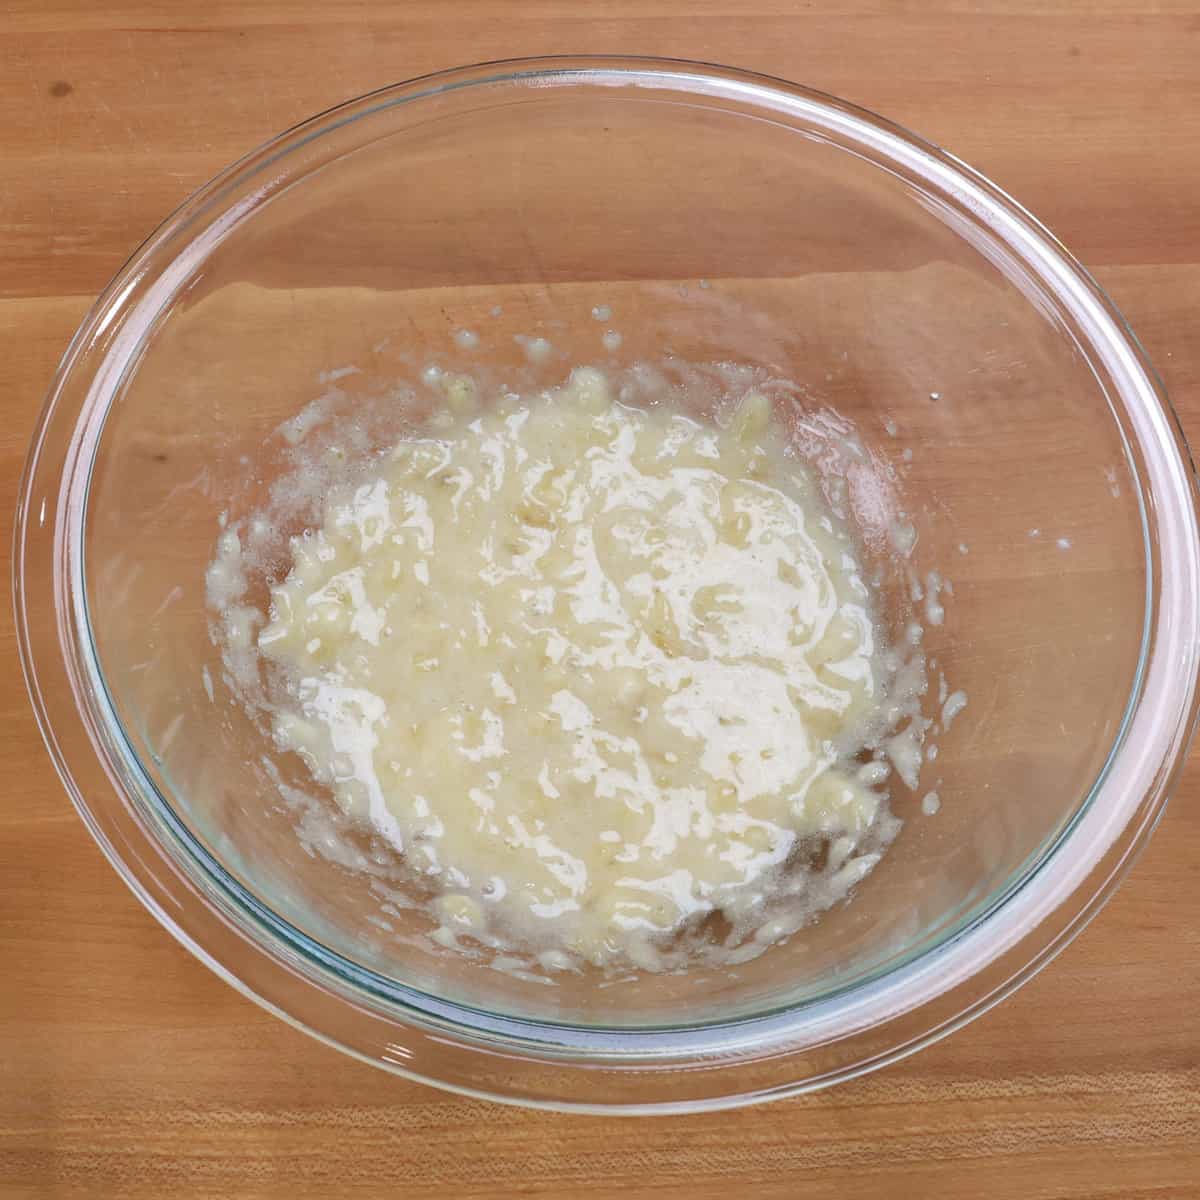 sugar and a mashed banana mixed together in a clear bowl.